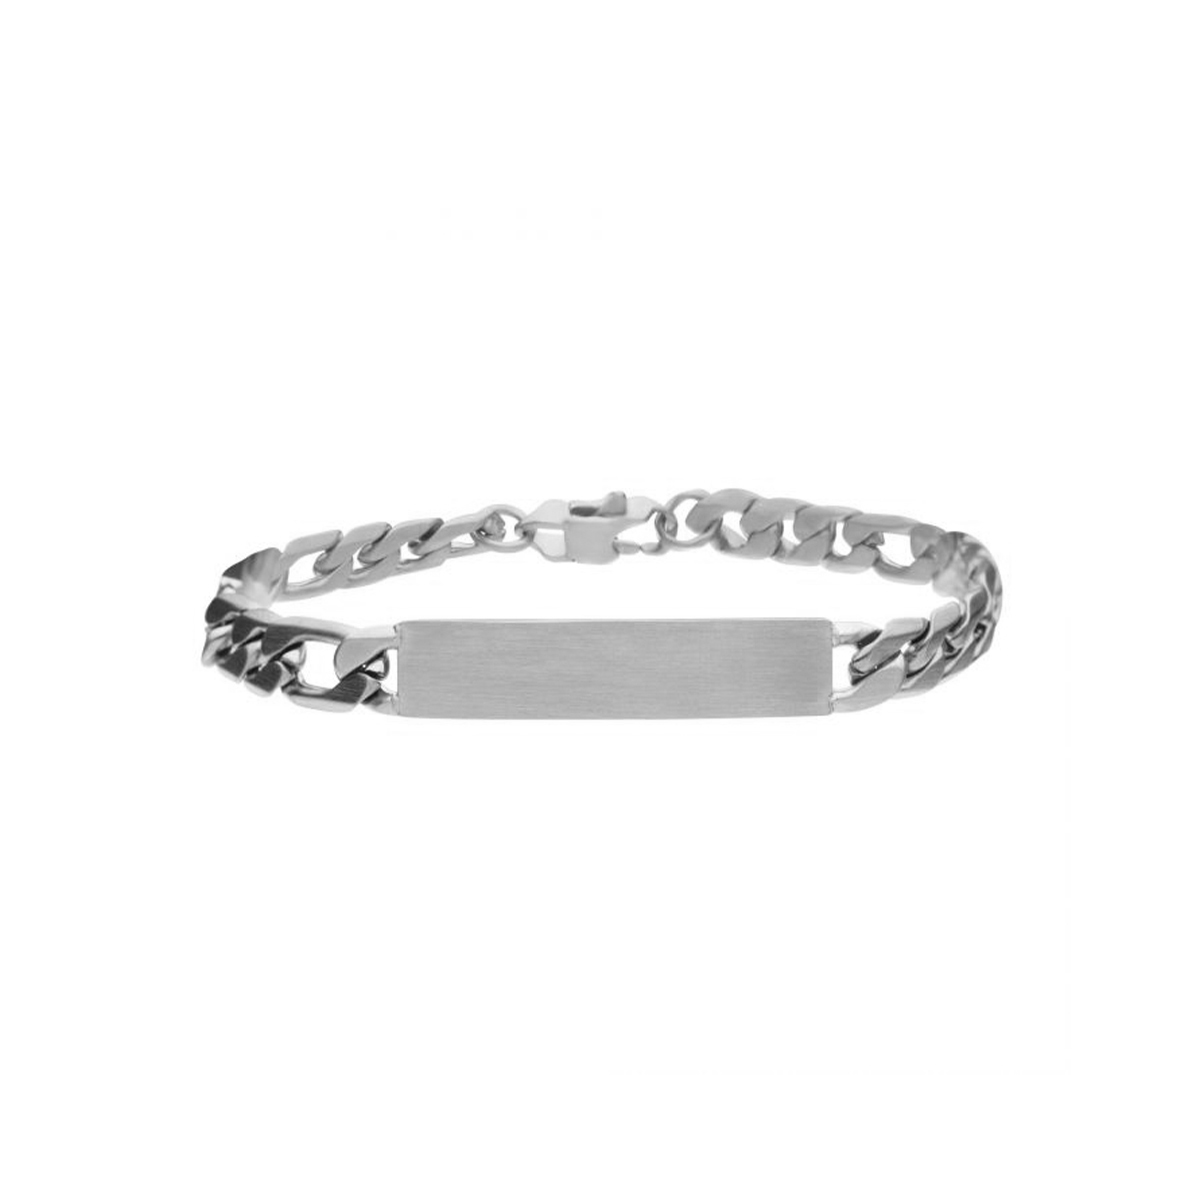 Stainless Steel Franco Bracelet with ID Block